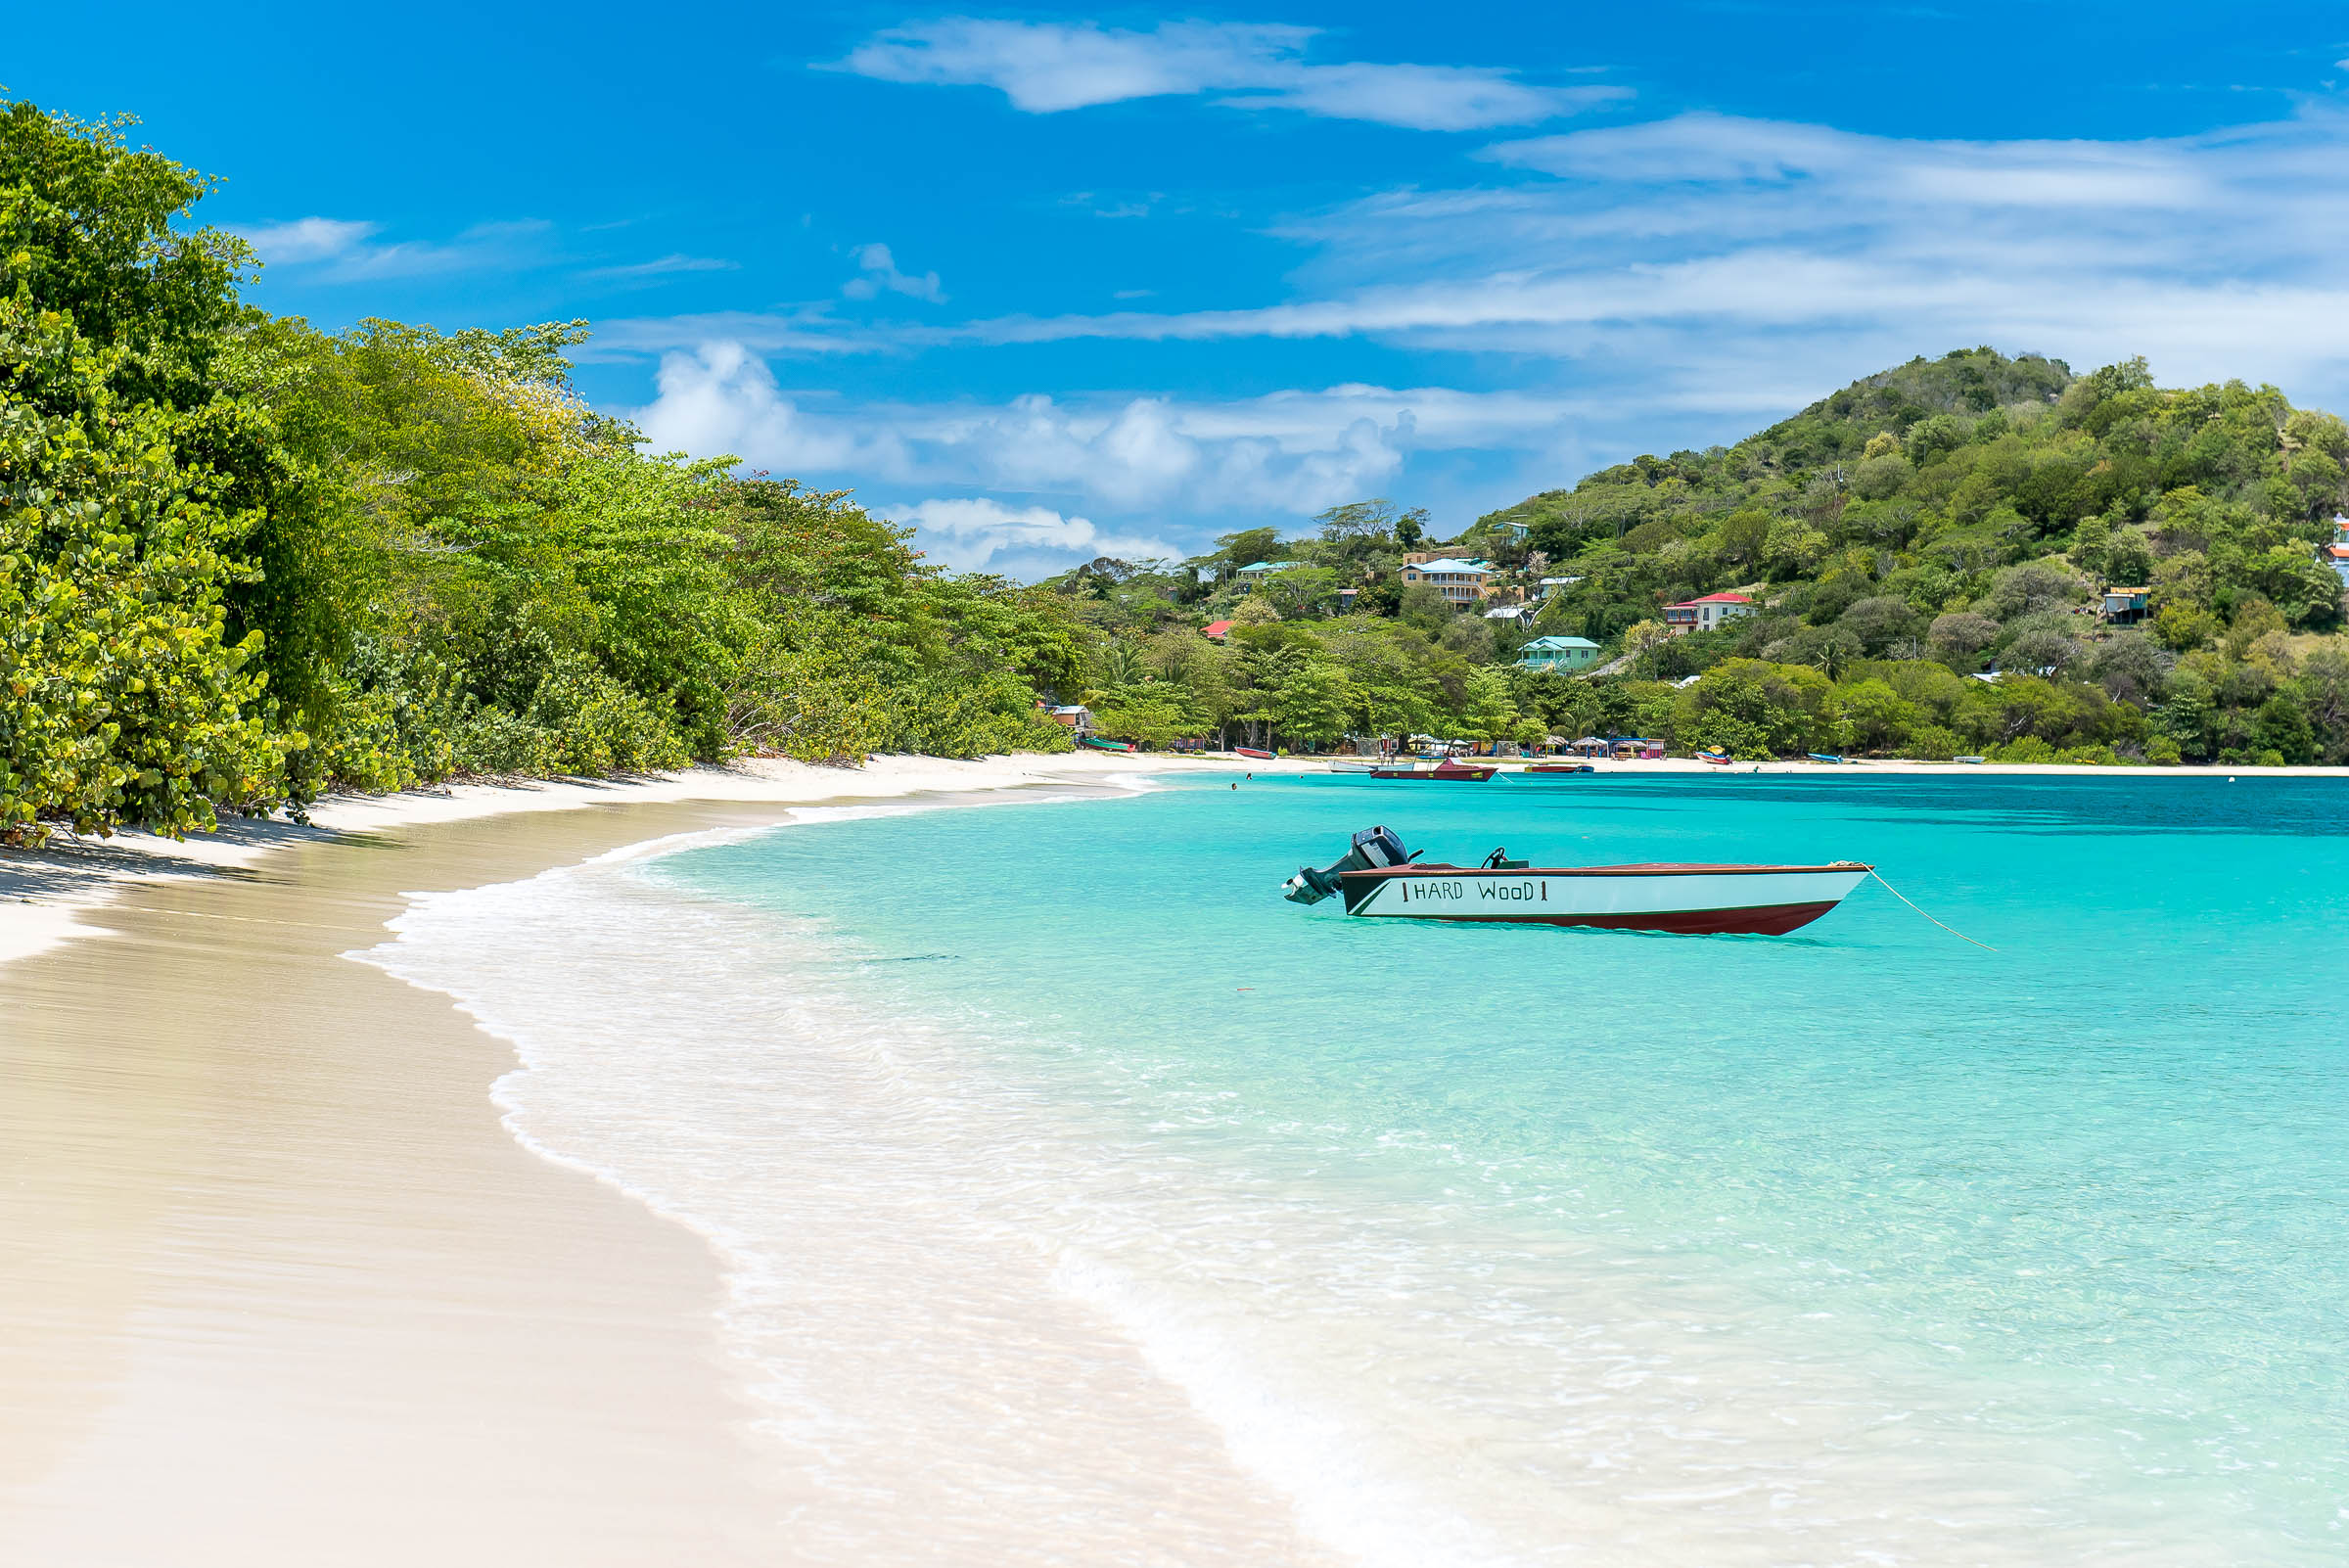 Carriacou paradise beach with small boat.